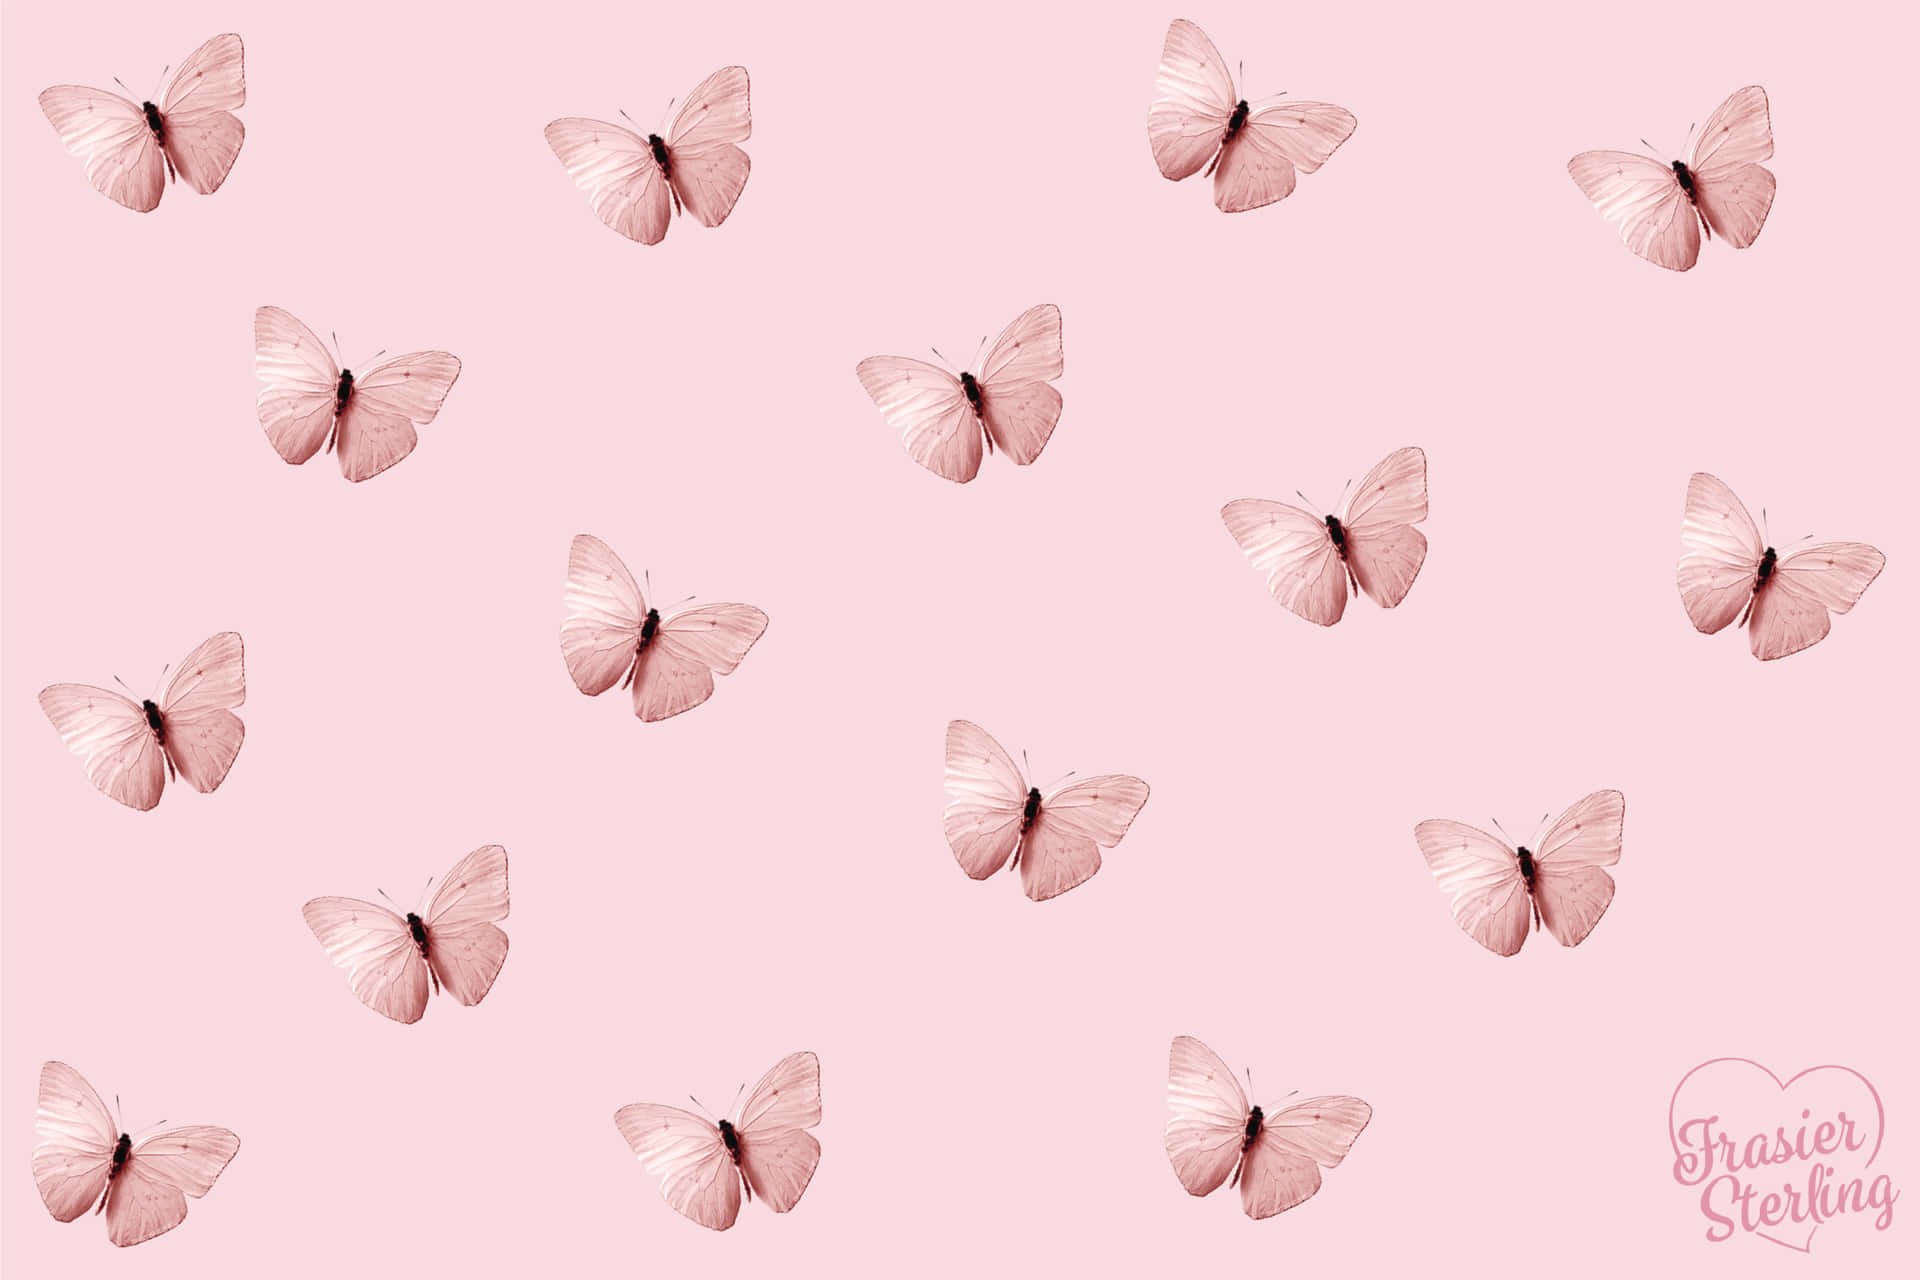 Explore the intricacies of nature with Butterflies Laptop Wallpaper